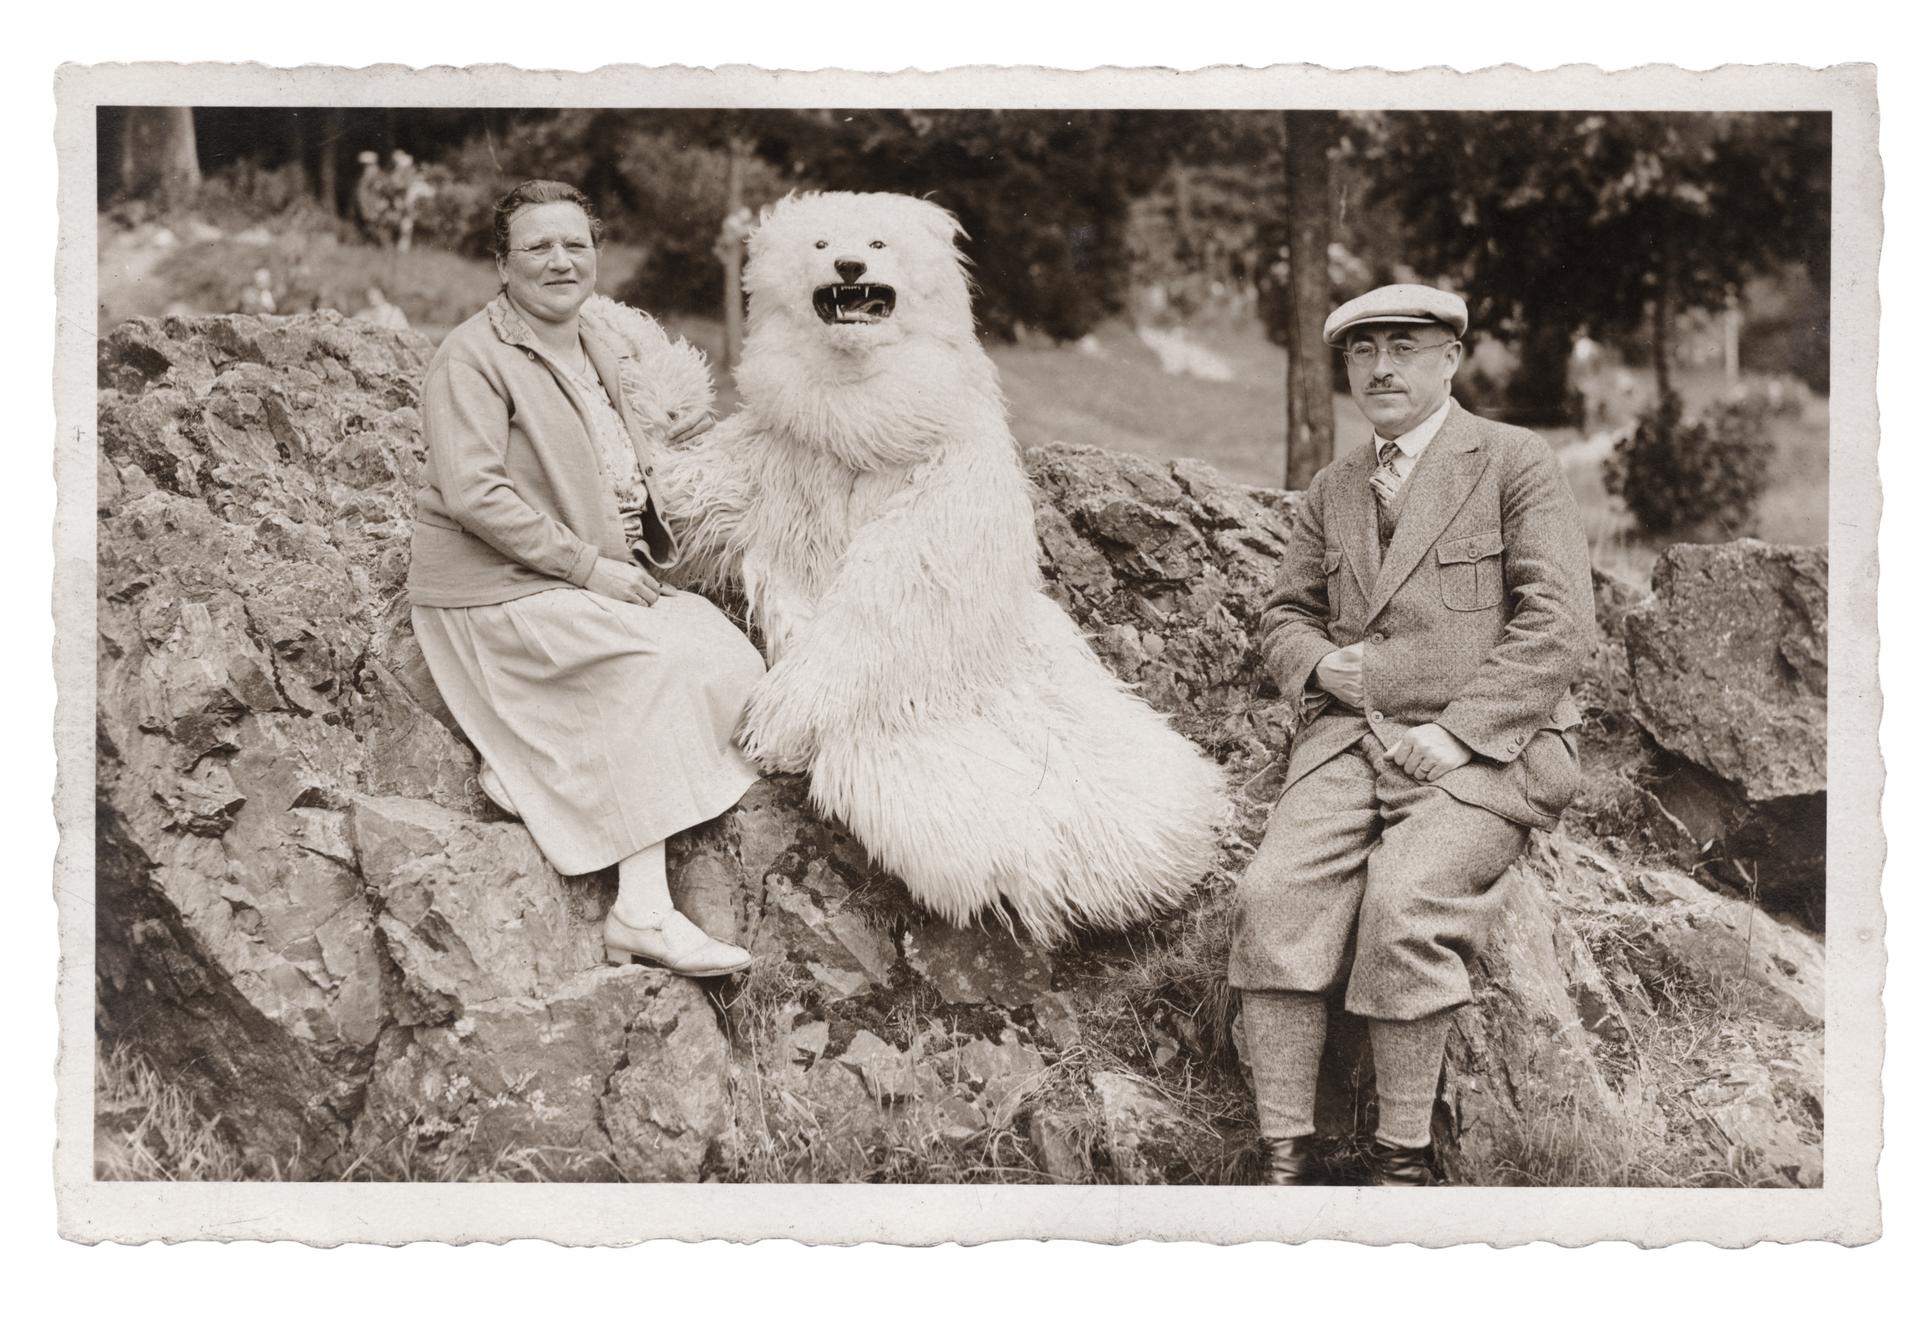 A couple pose on a rock with a "polar bear" somewhere in Germany